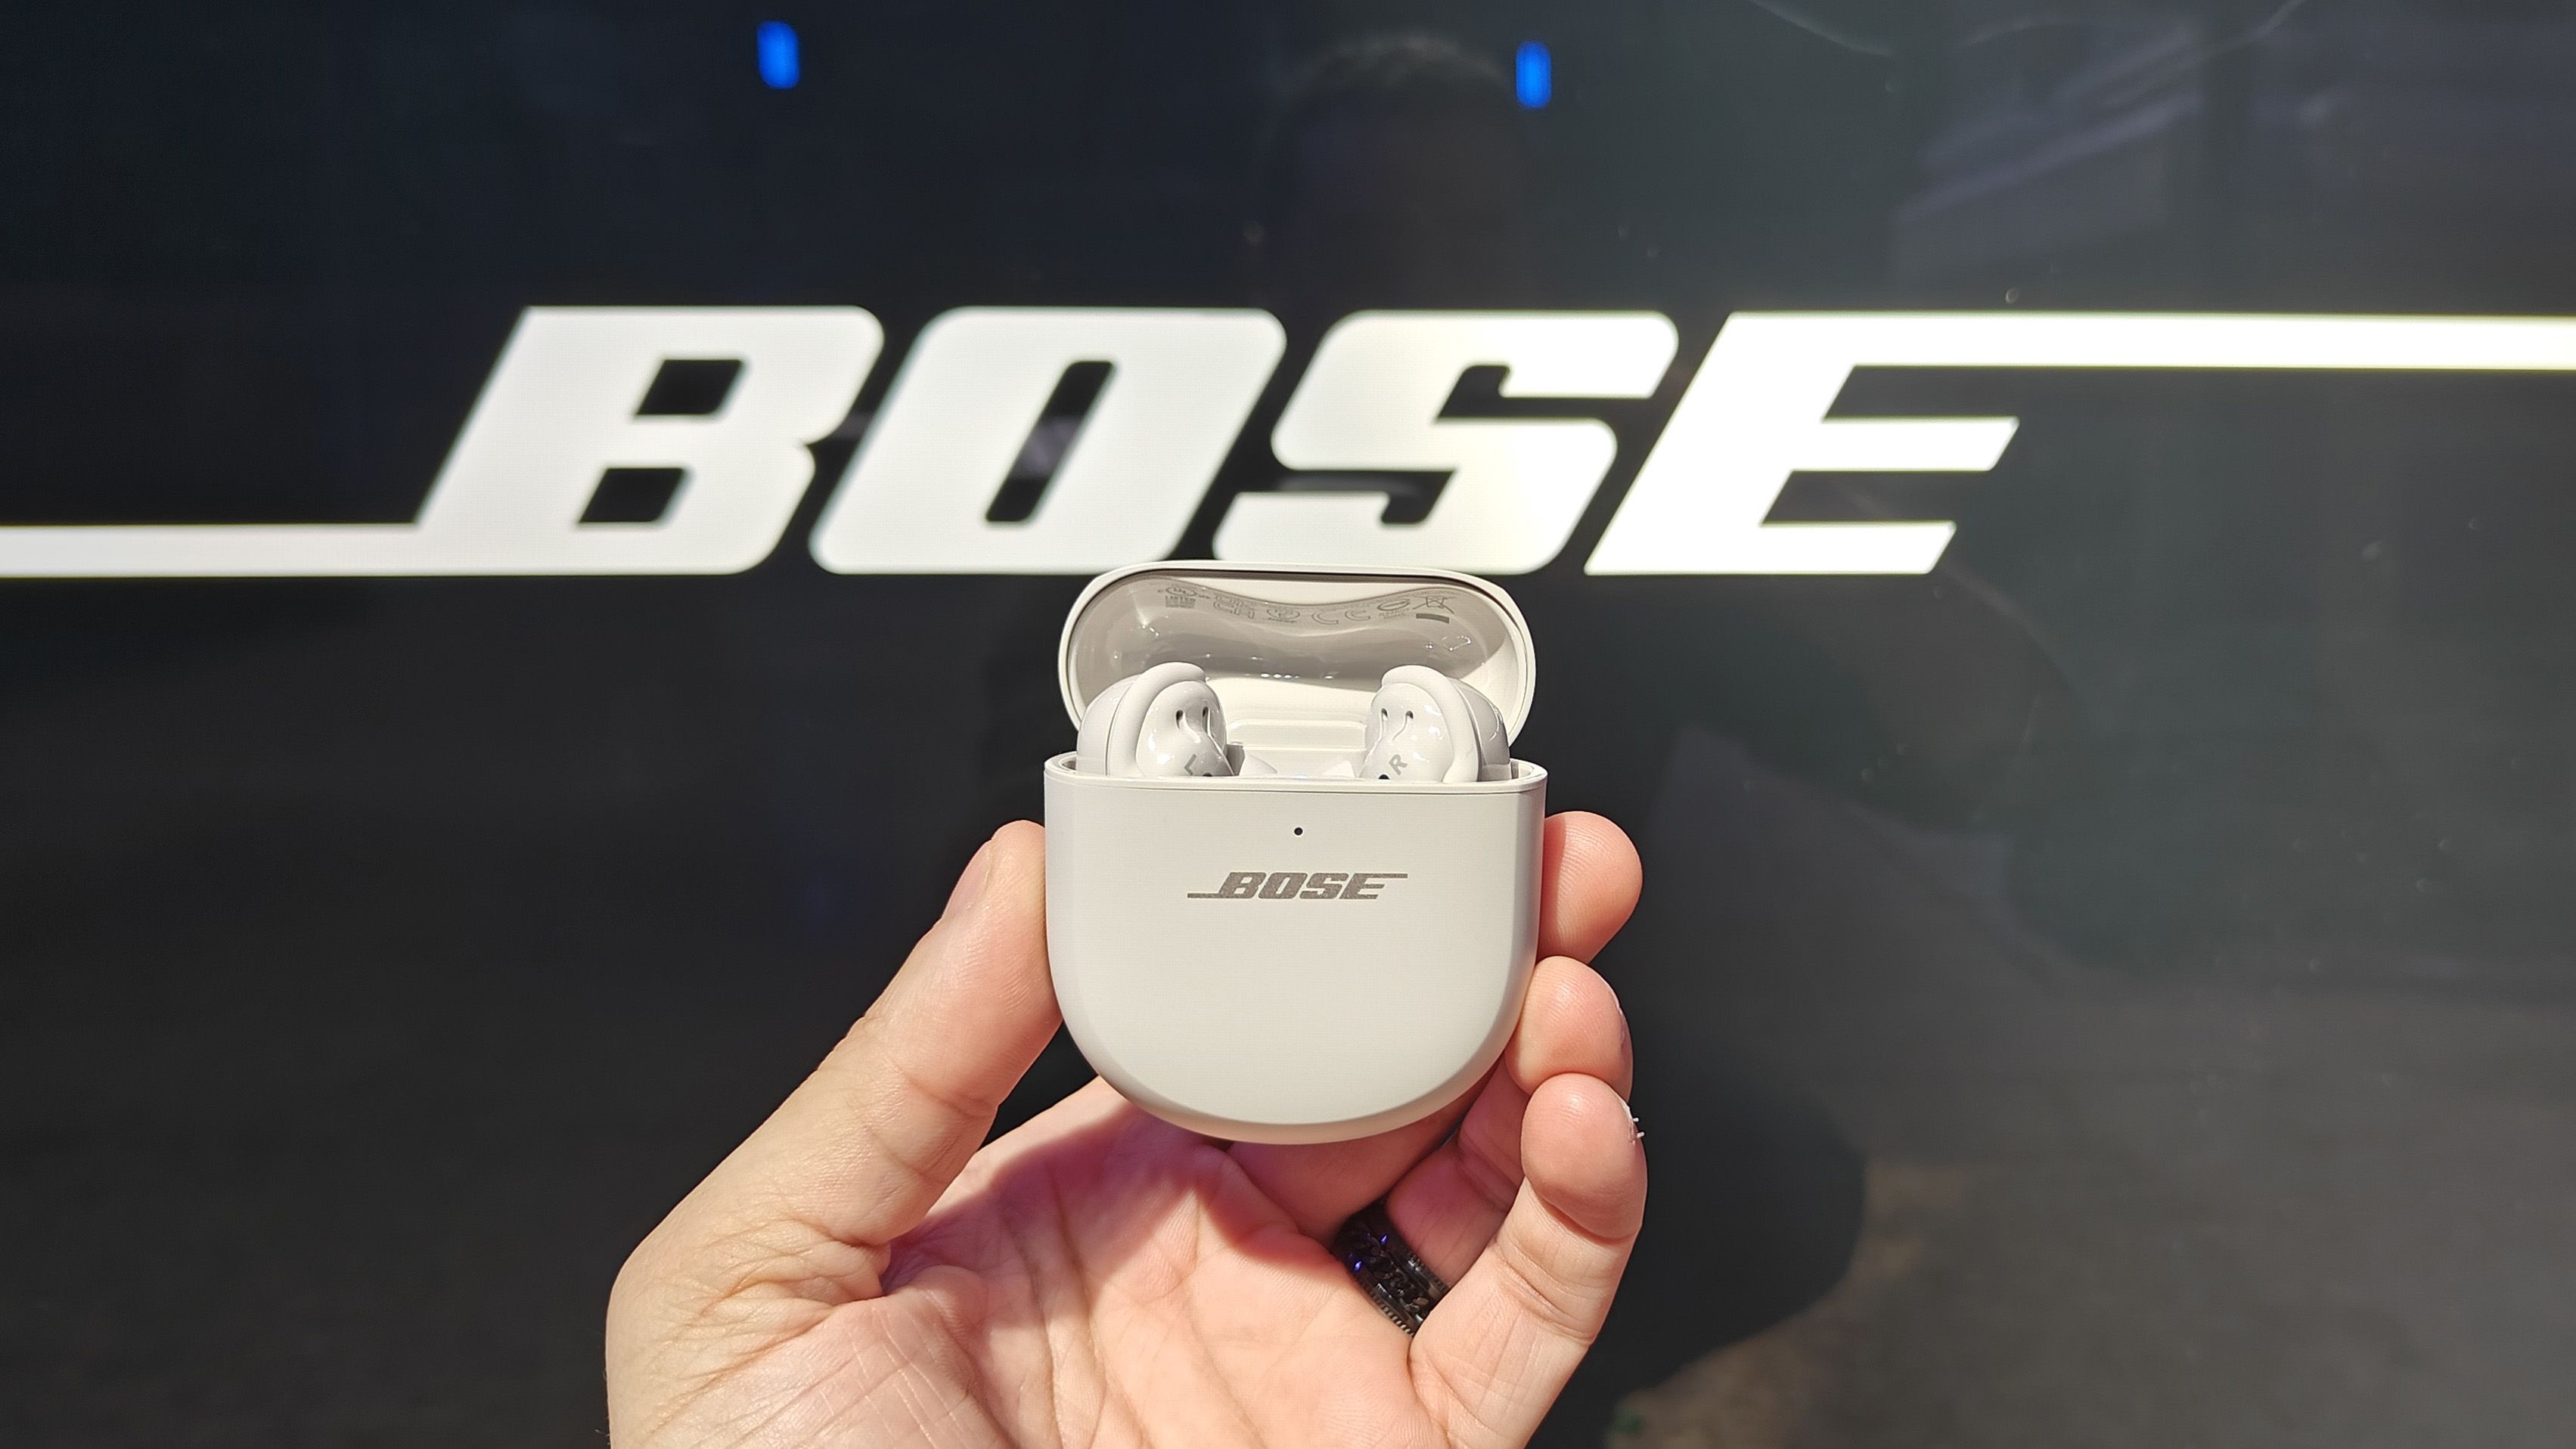 Bose QuietComfort Ultra Active Noise Cancelling True Wireless